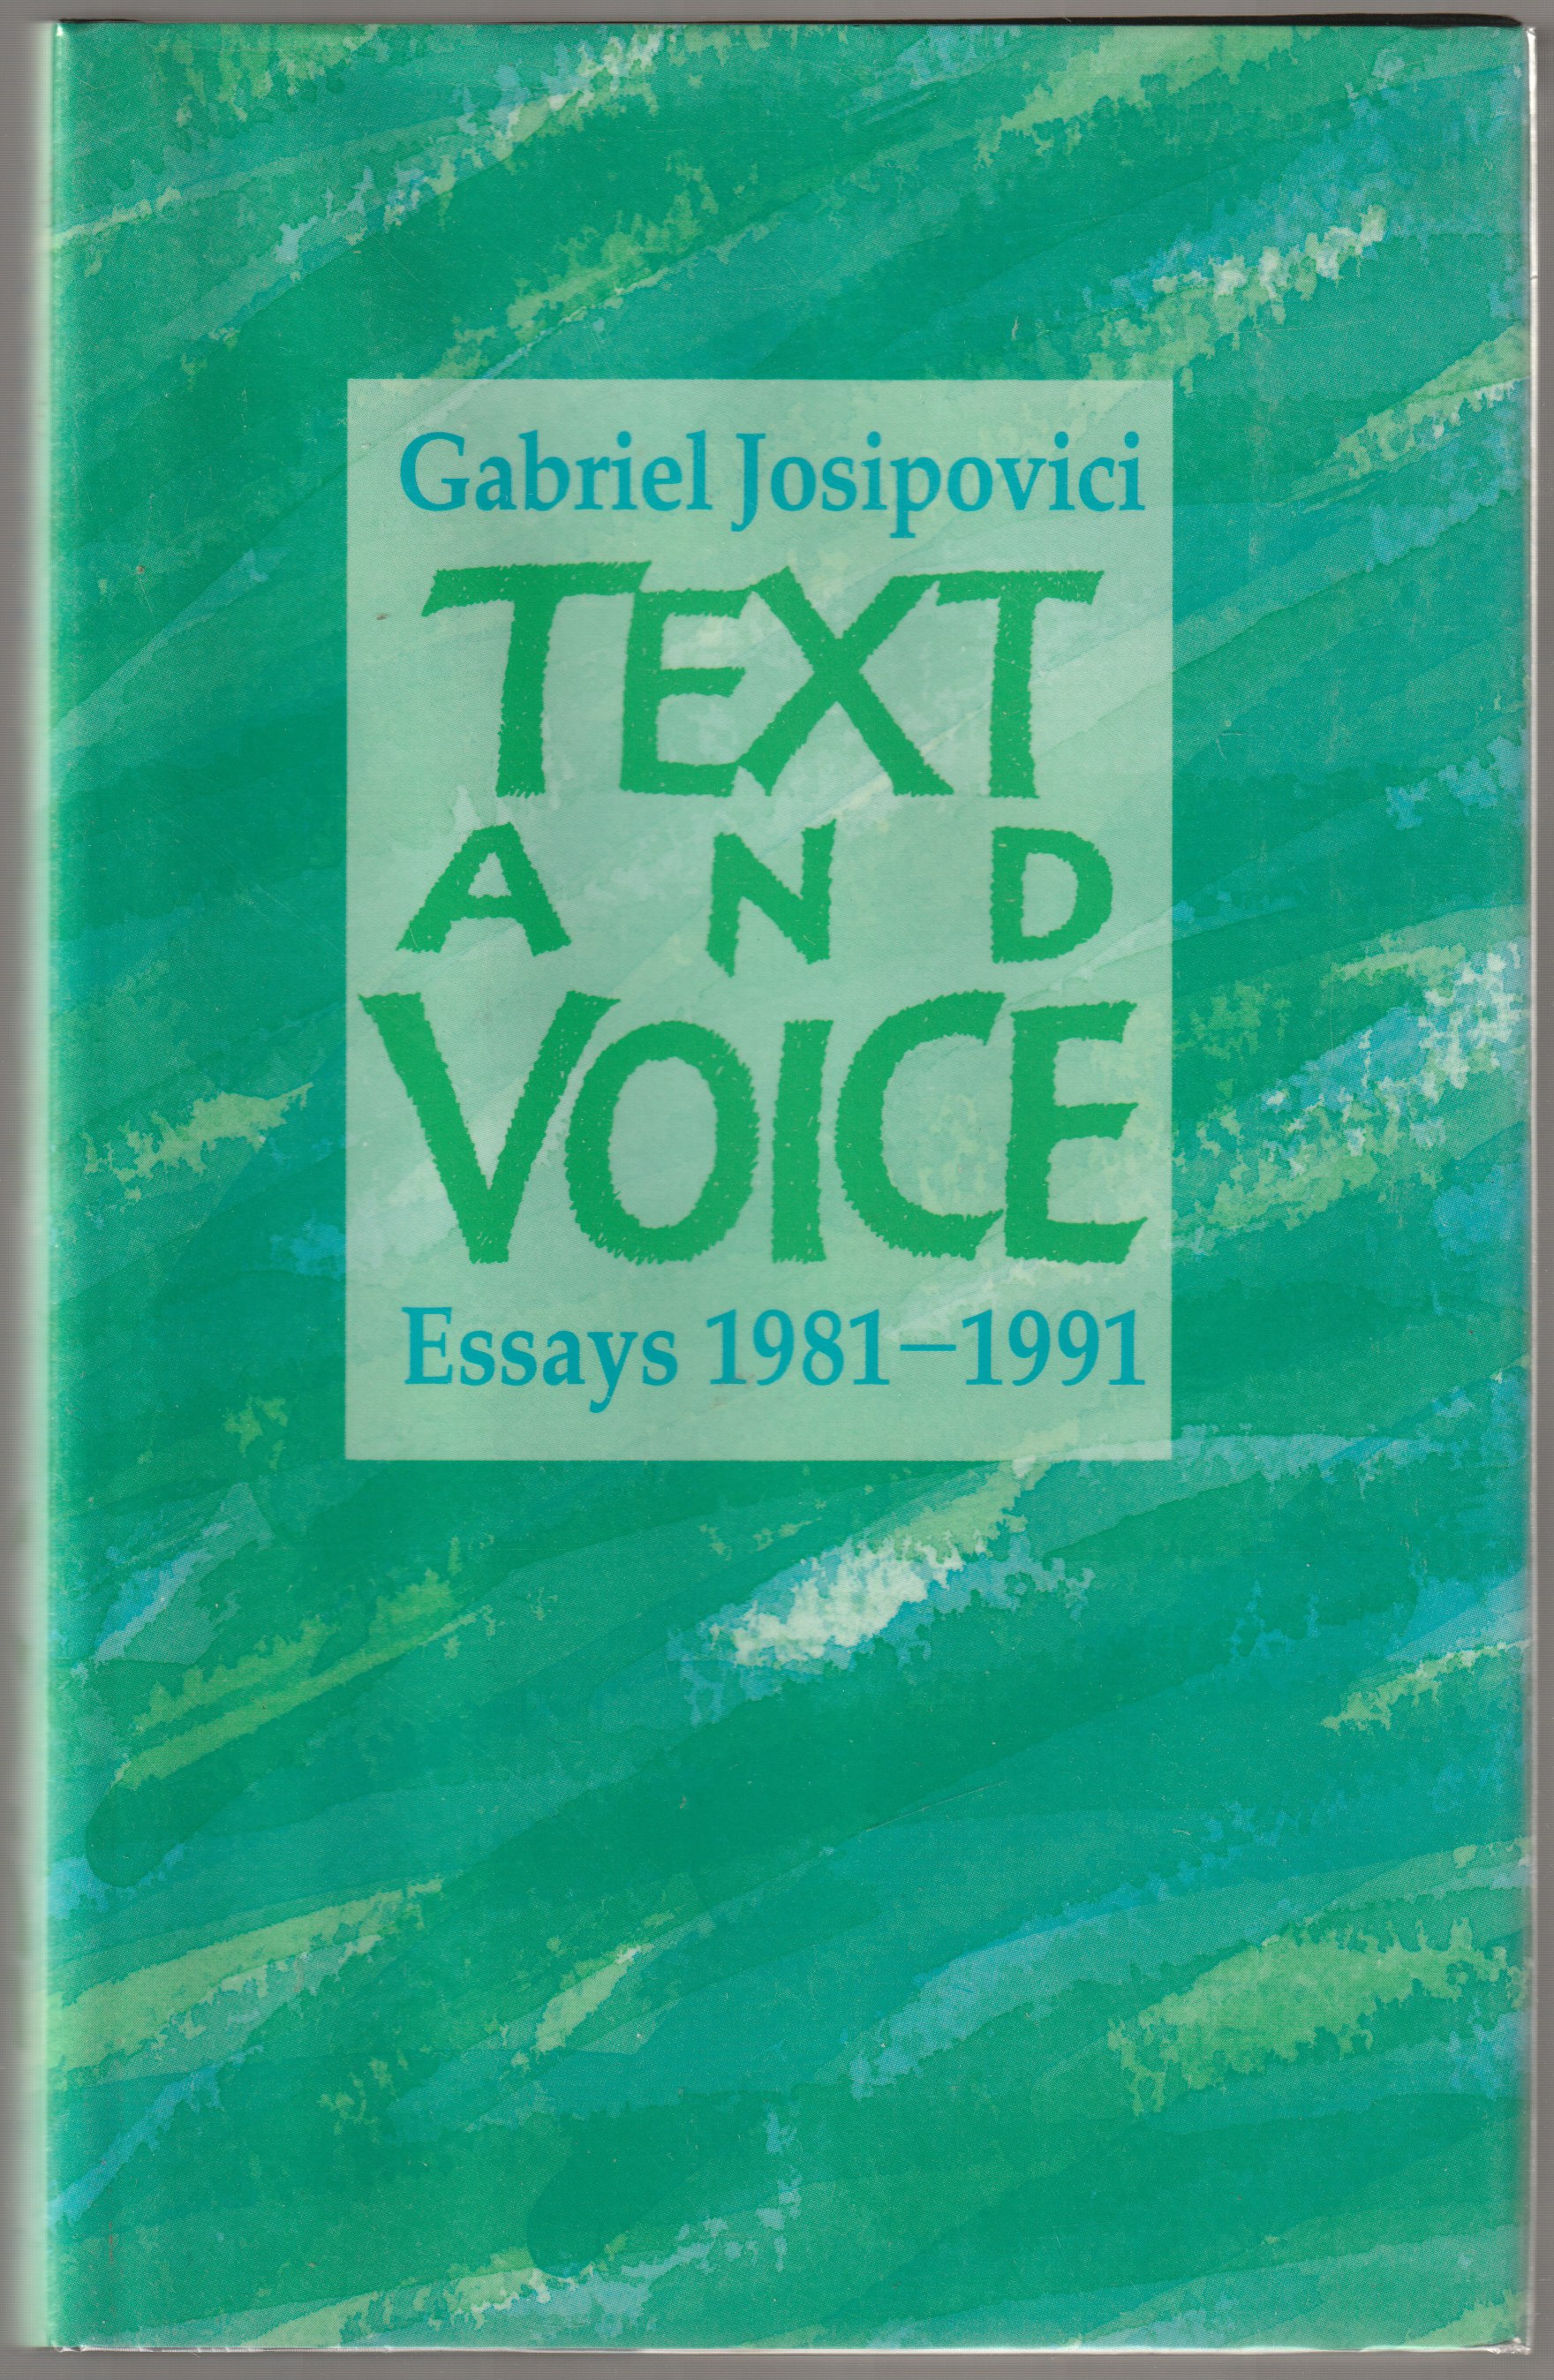 Text and voice : essays 1981-1991.